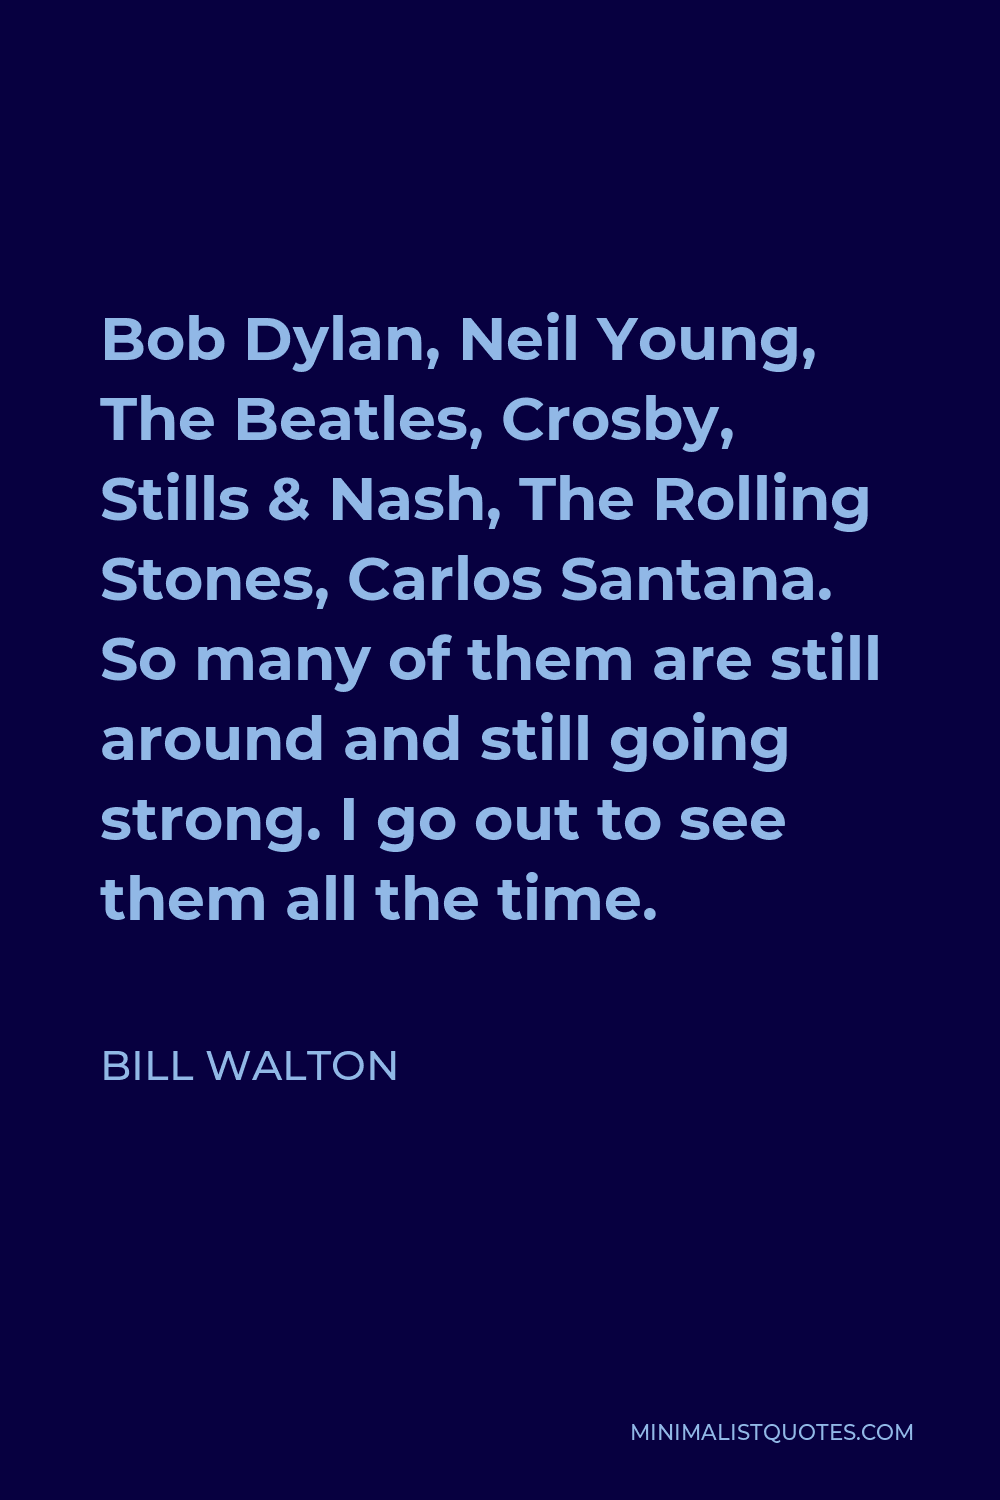 Bill Walton Quote - Bob Dylan, Neil Young, The Beatles, Crosby, Stills & Nash, The Rolling Stones, Carlos Santana. So many of them are still around and still going strong. I go out to see them all the time.